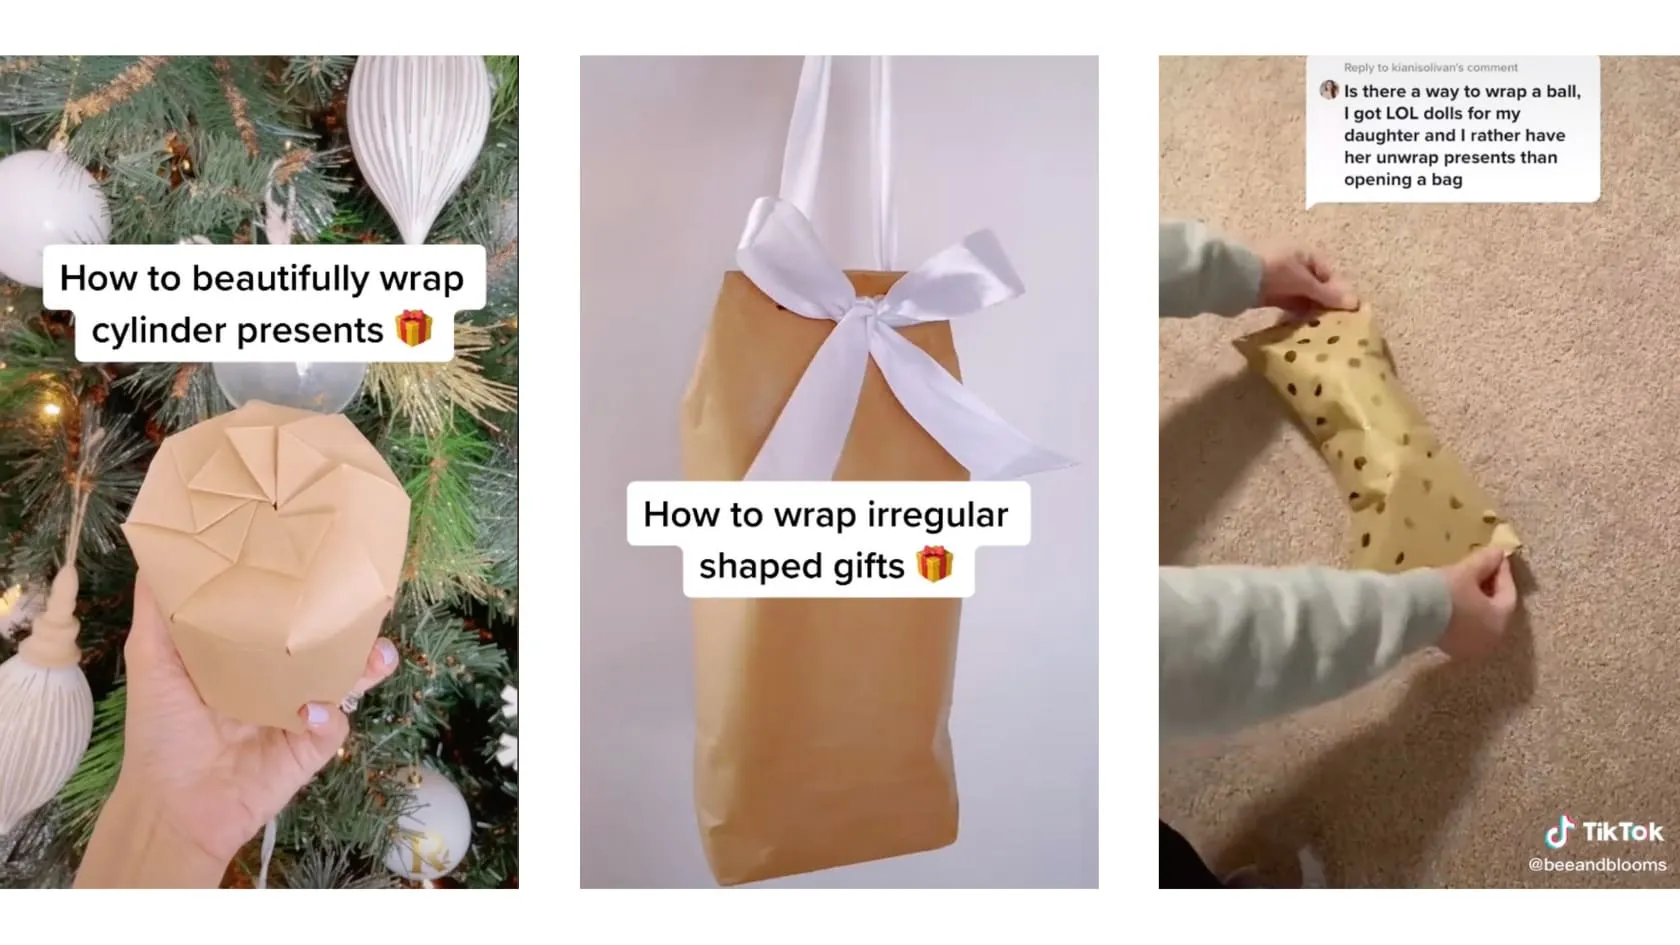 The 12 best gift-wrapping hacks for parents found on TikTok